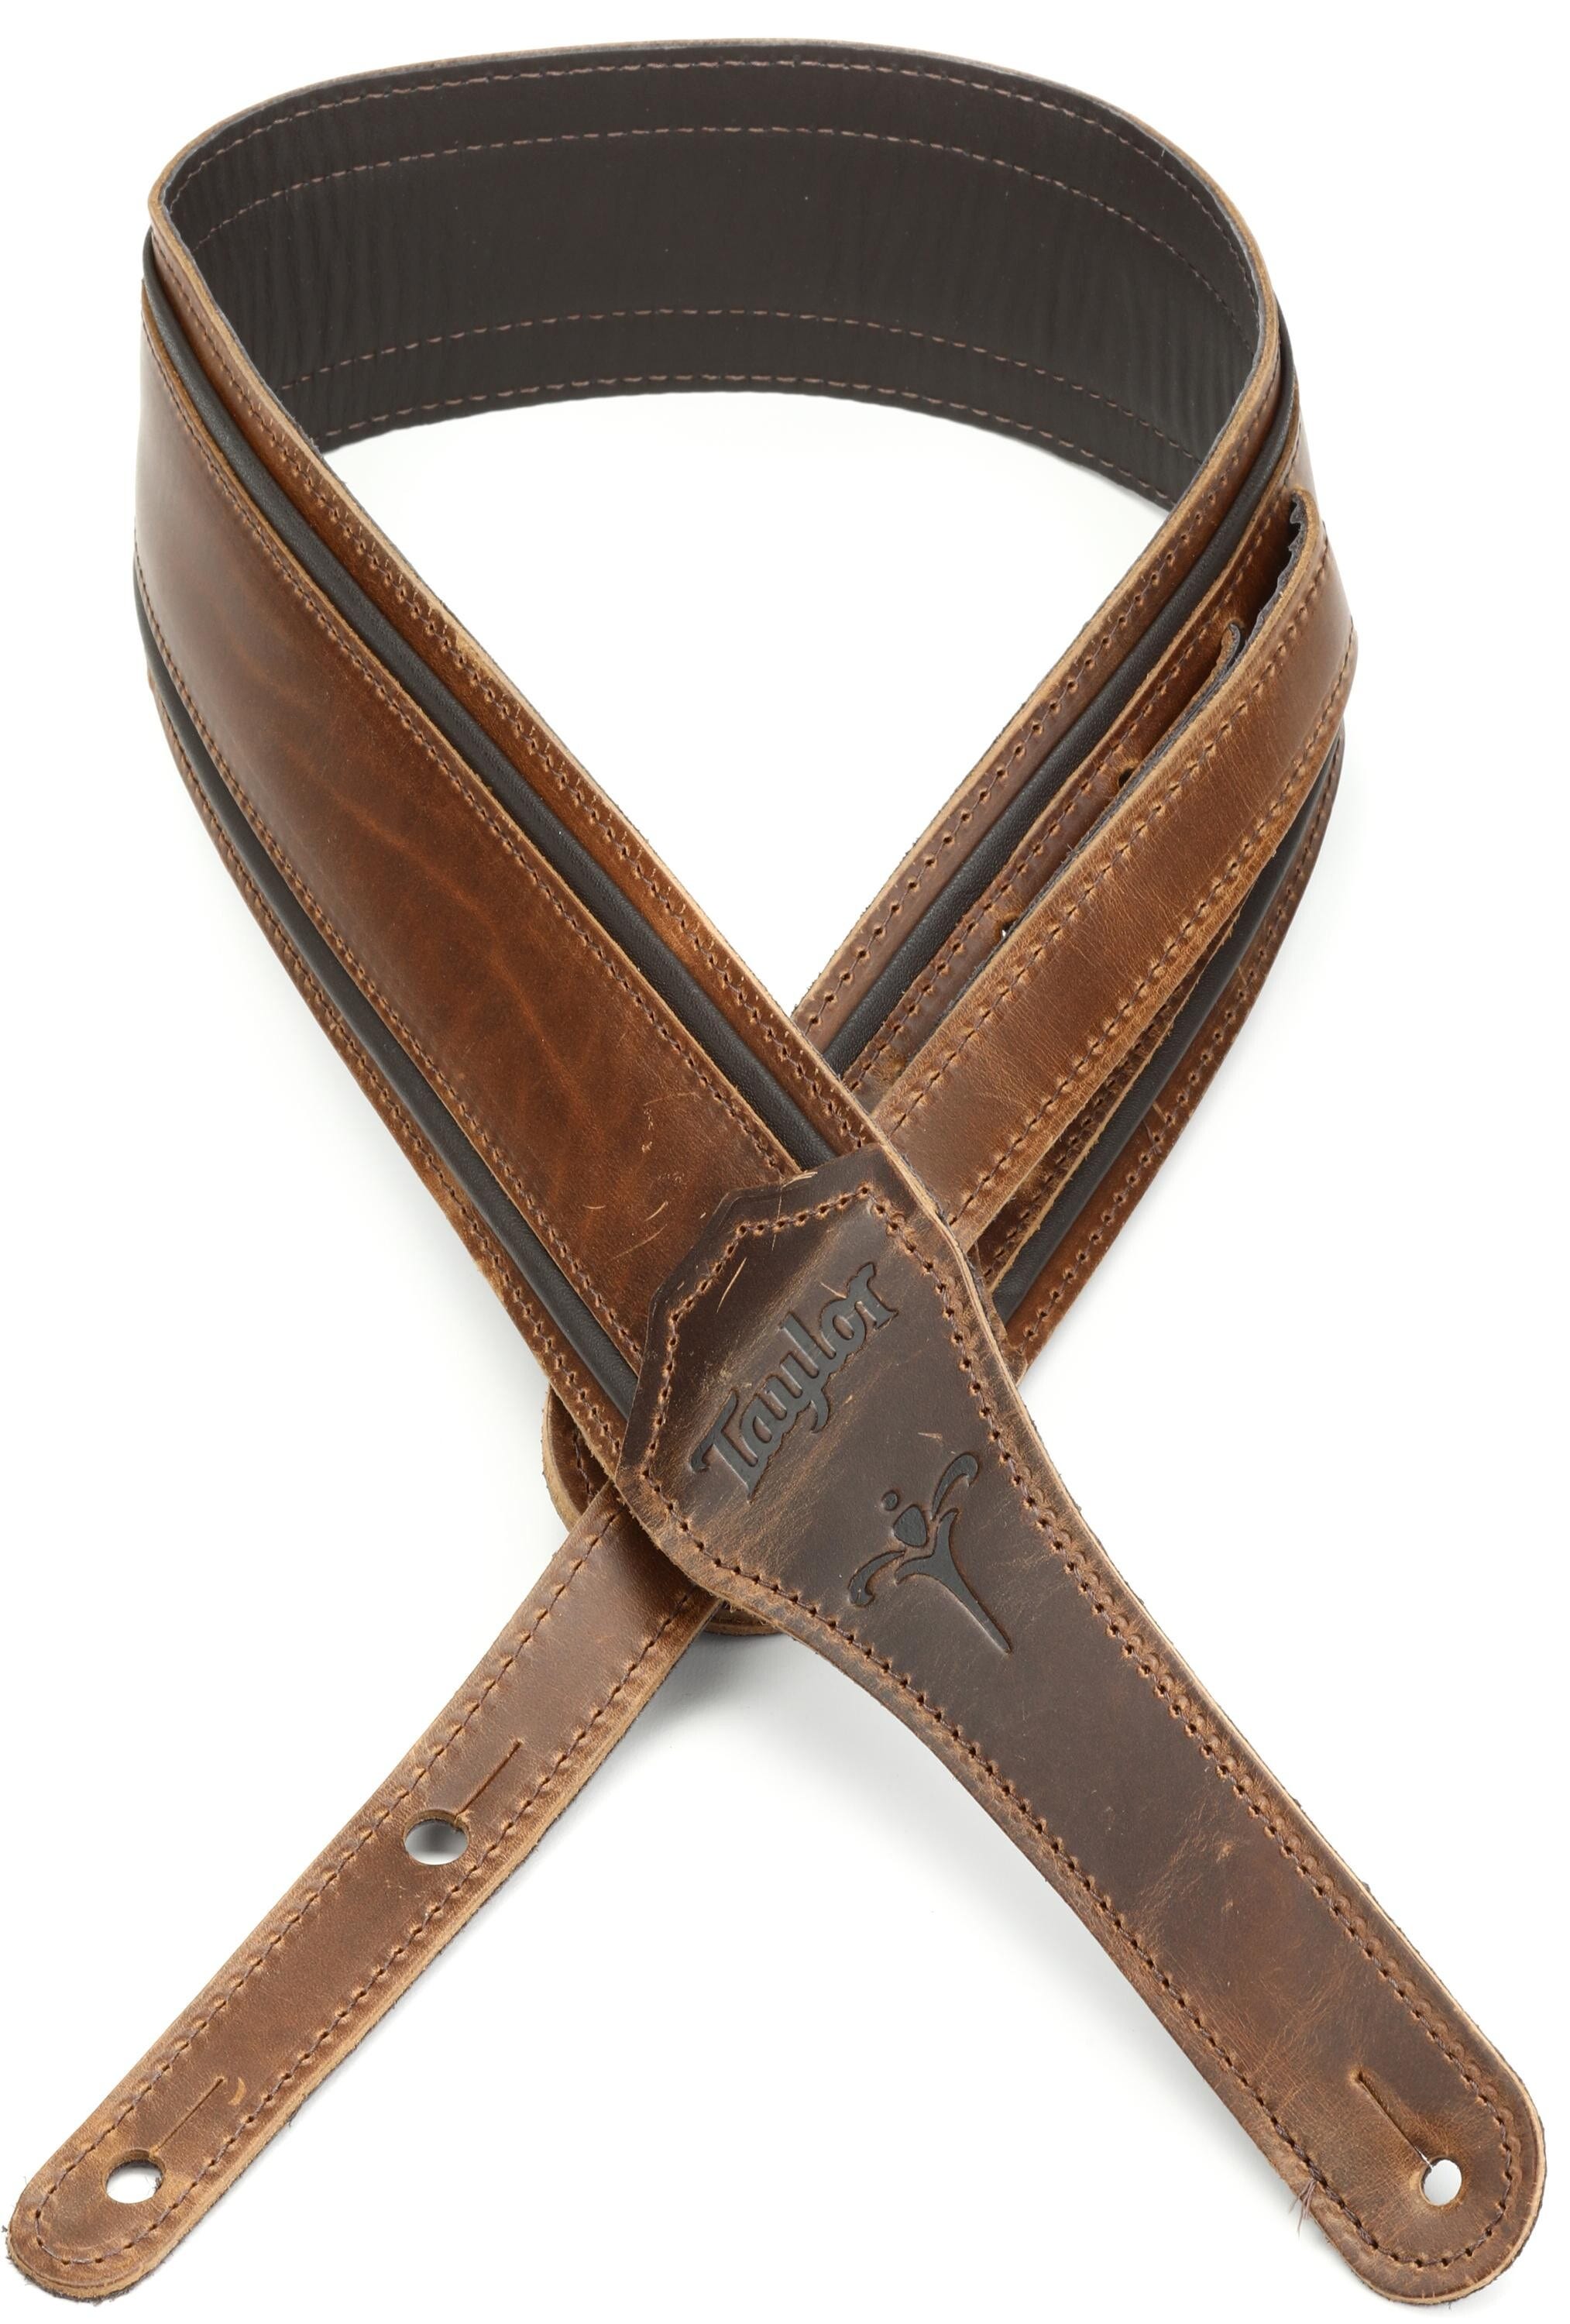 Steve's Music  Taylor - Taylor Fountain Strap - Leather - 2.5 - Weathered  Brn - Weathered brown - 4125-25